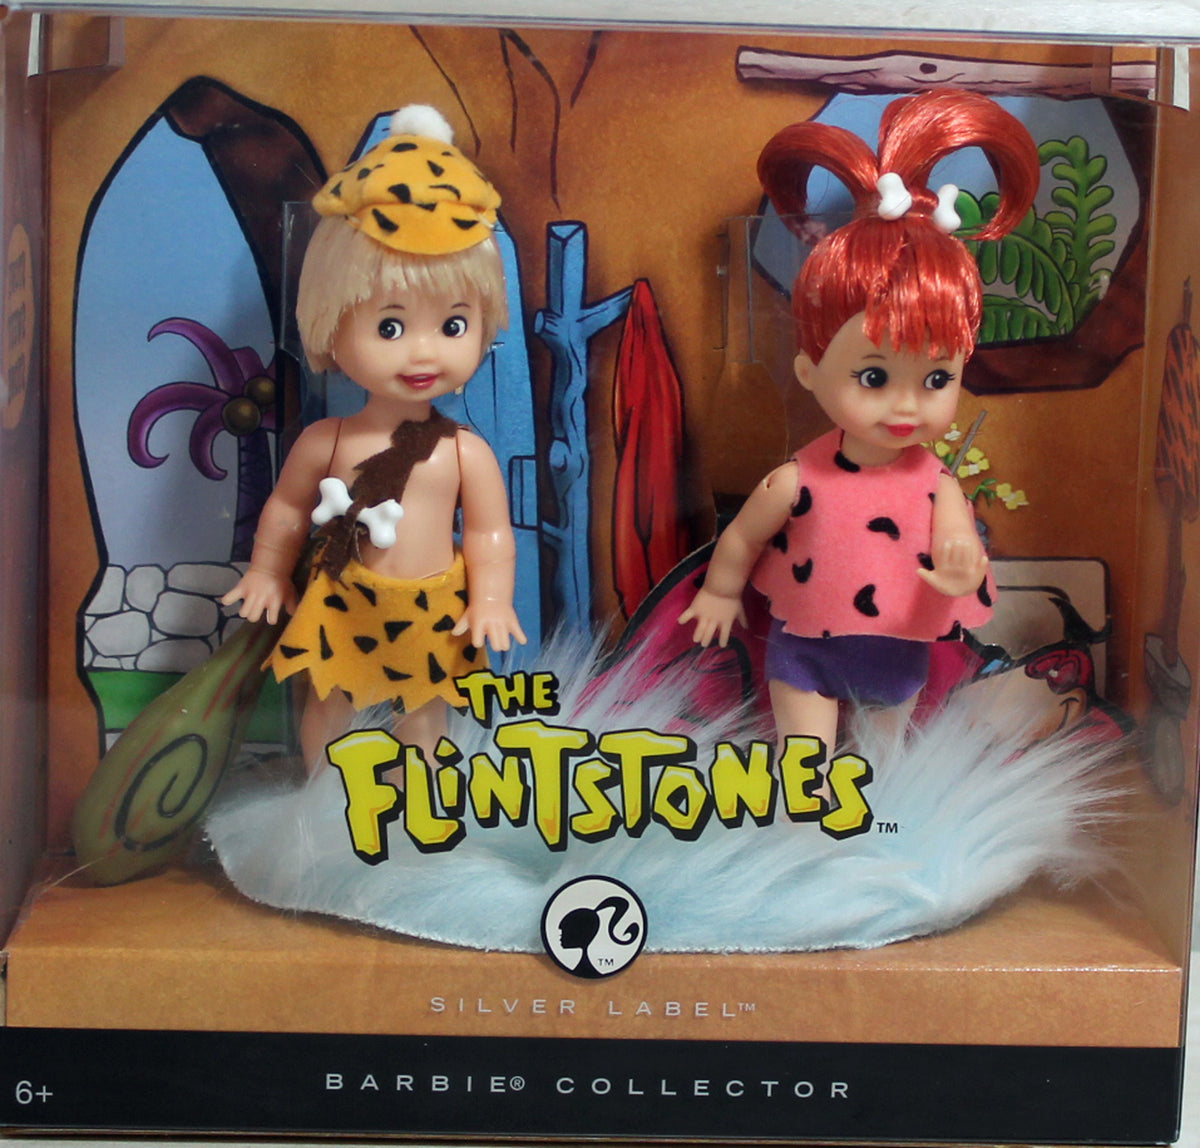 Barbie Collector Silver Label - The Flintstones (Pebbles and Bamm